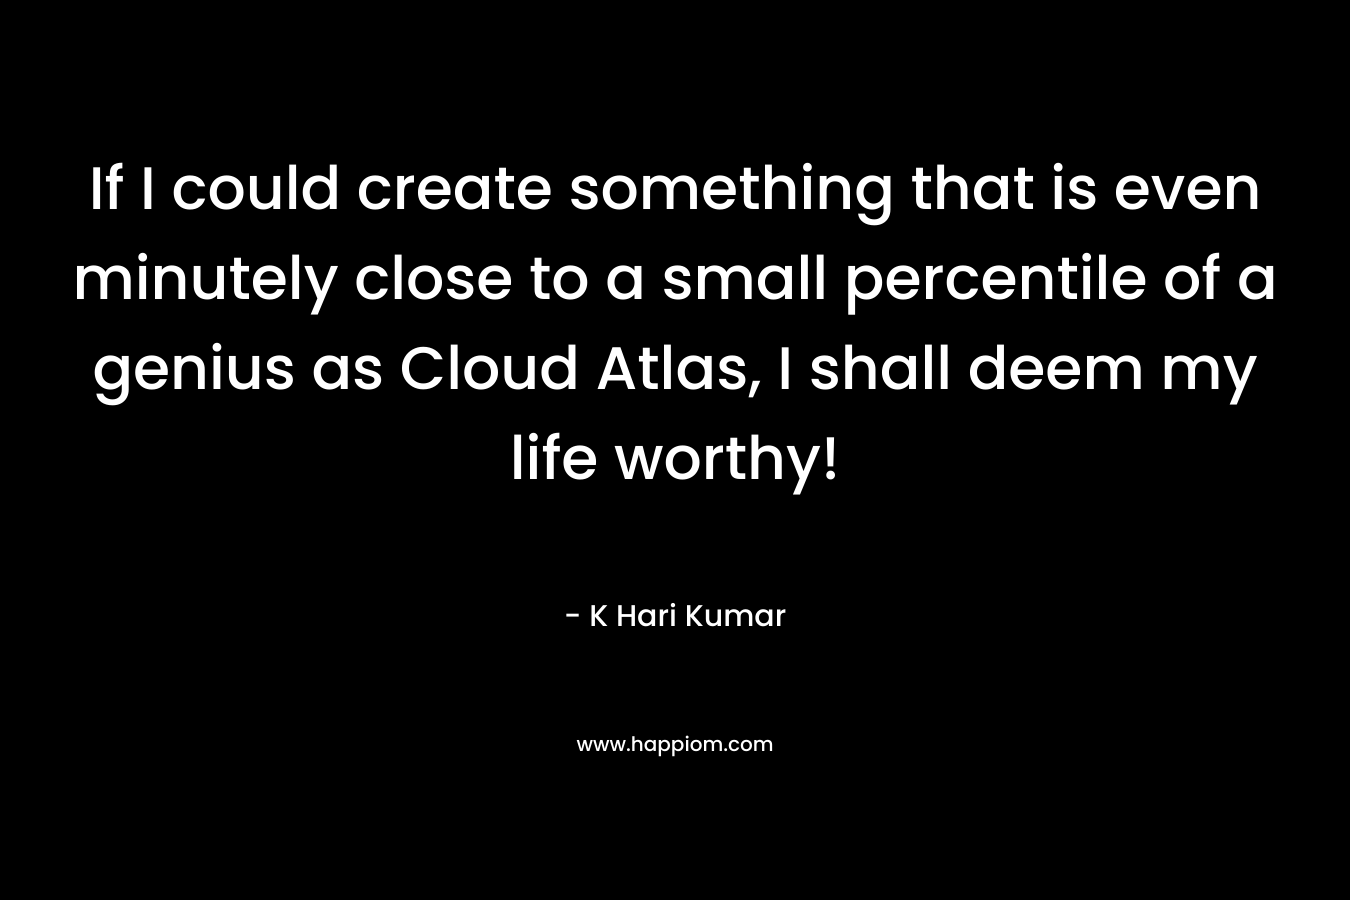 If I could create something that is even minutely close to a small percentile of a genius as Cloud Atlas, I shall deem my life worthy! – K Hari Kumar